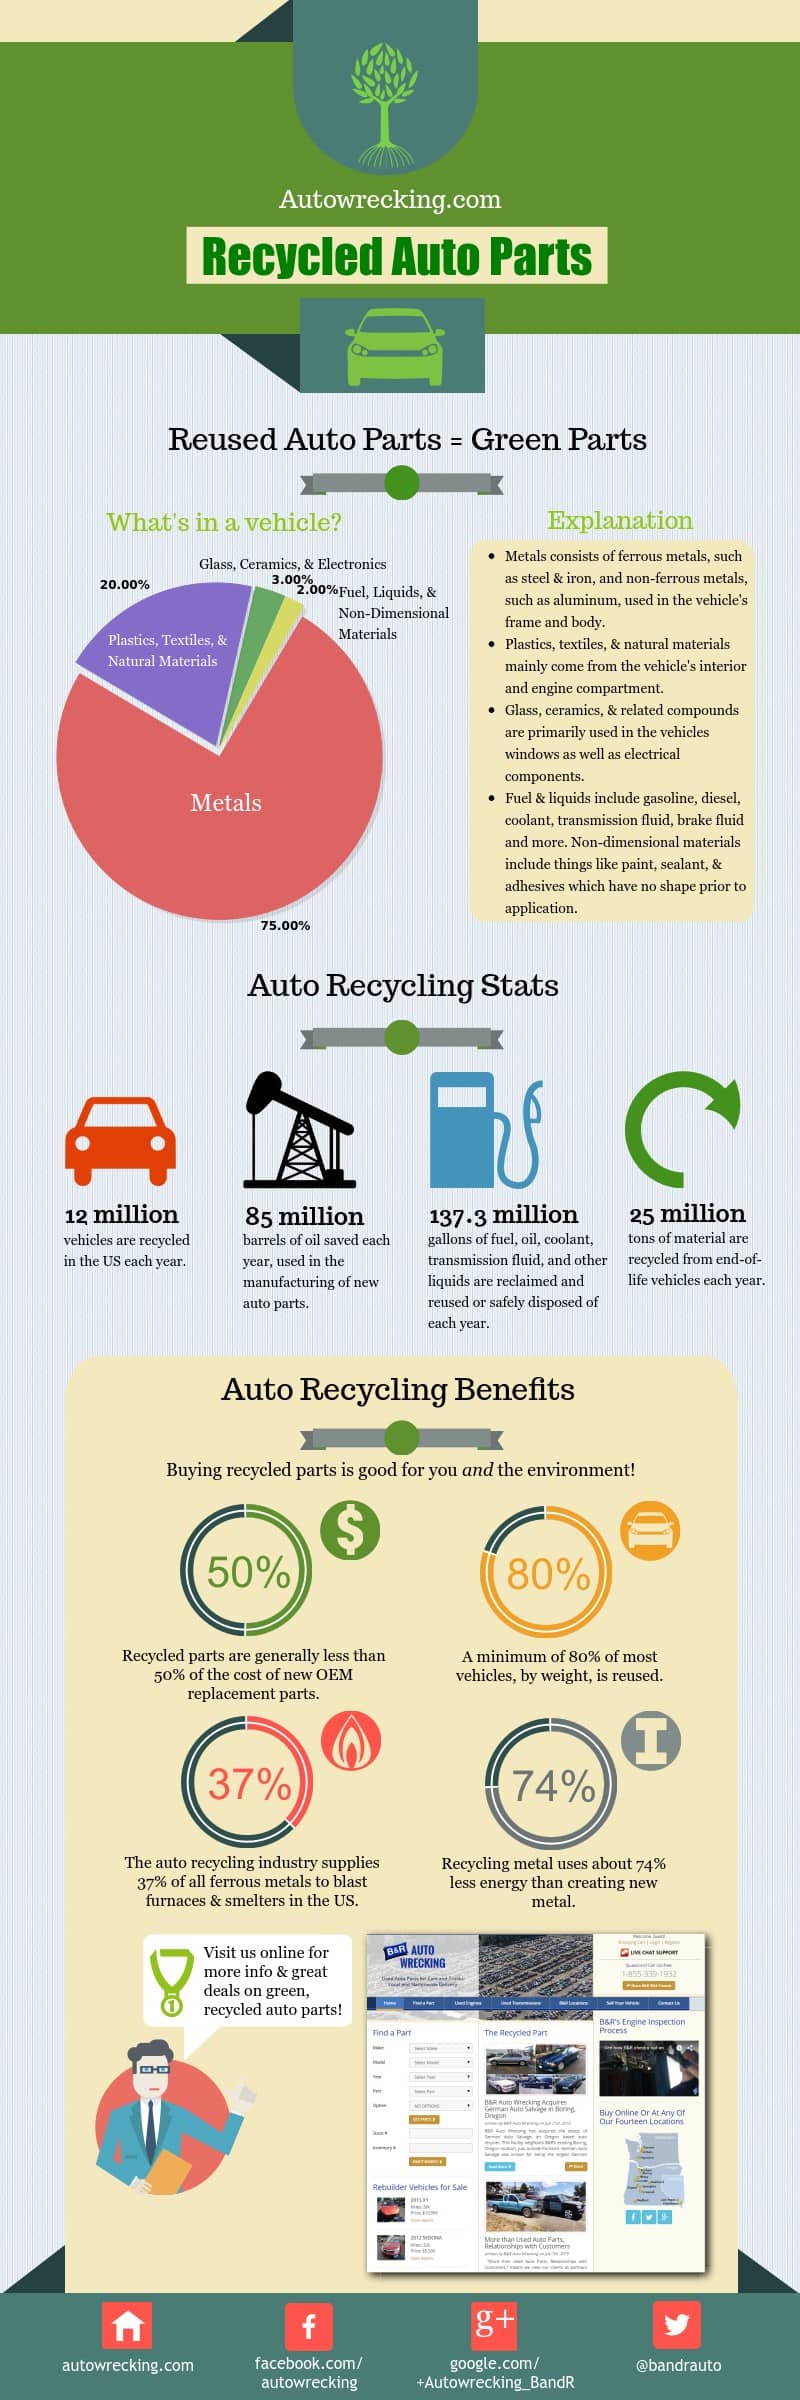 recycled-green-auto-parts-info-graphic